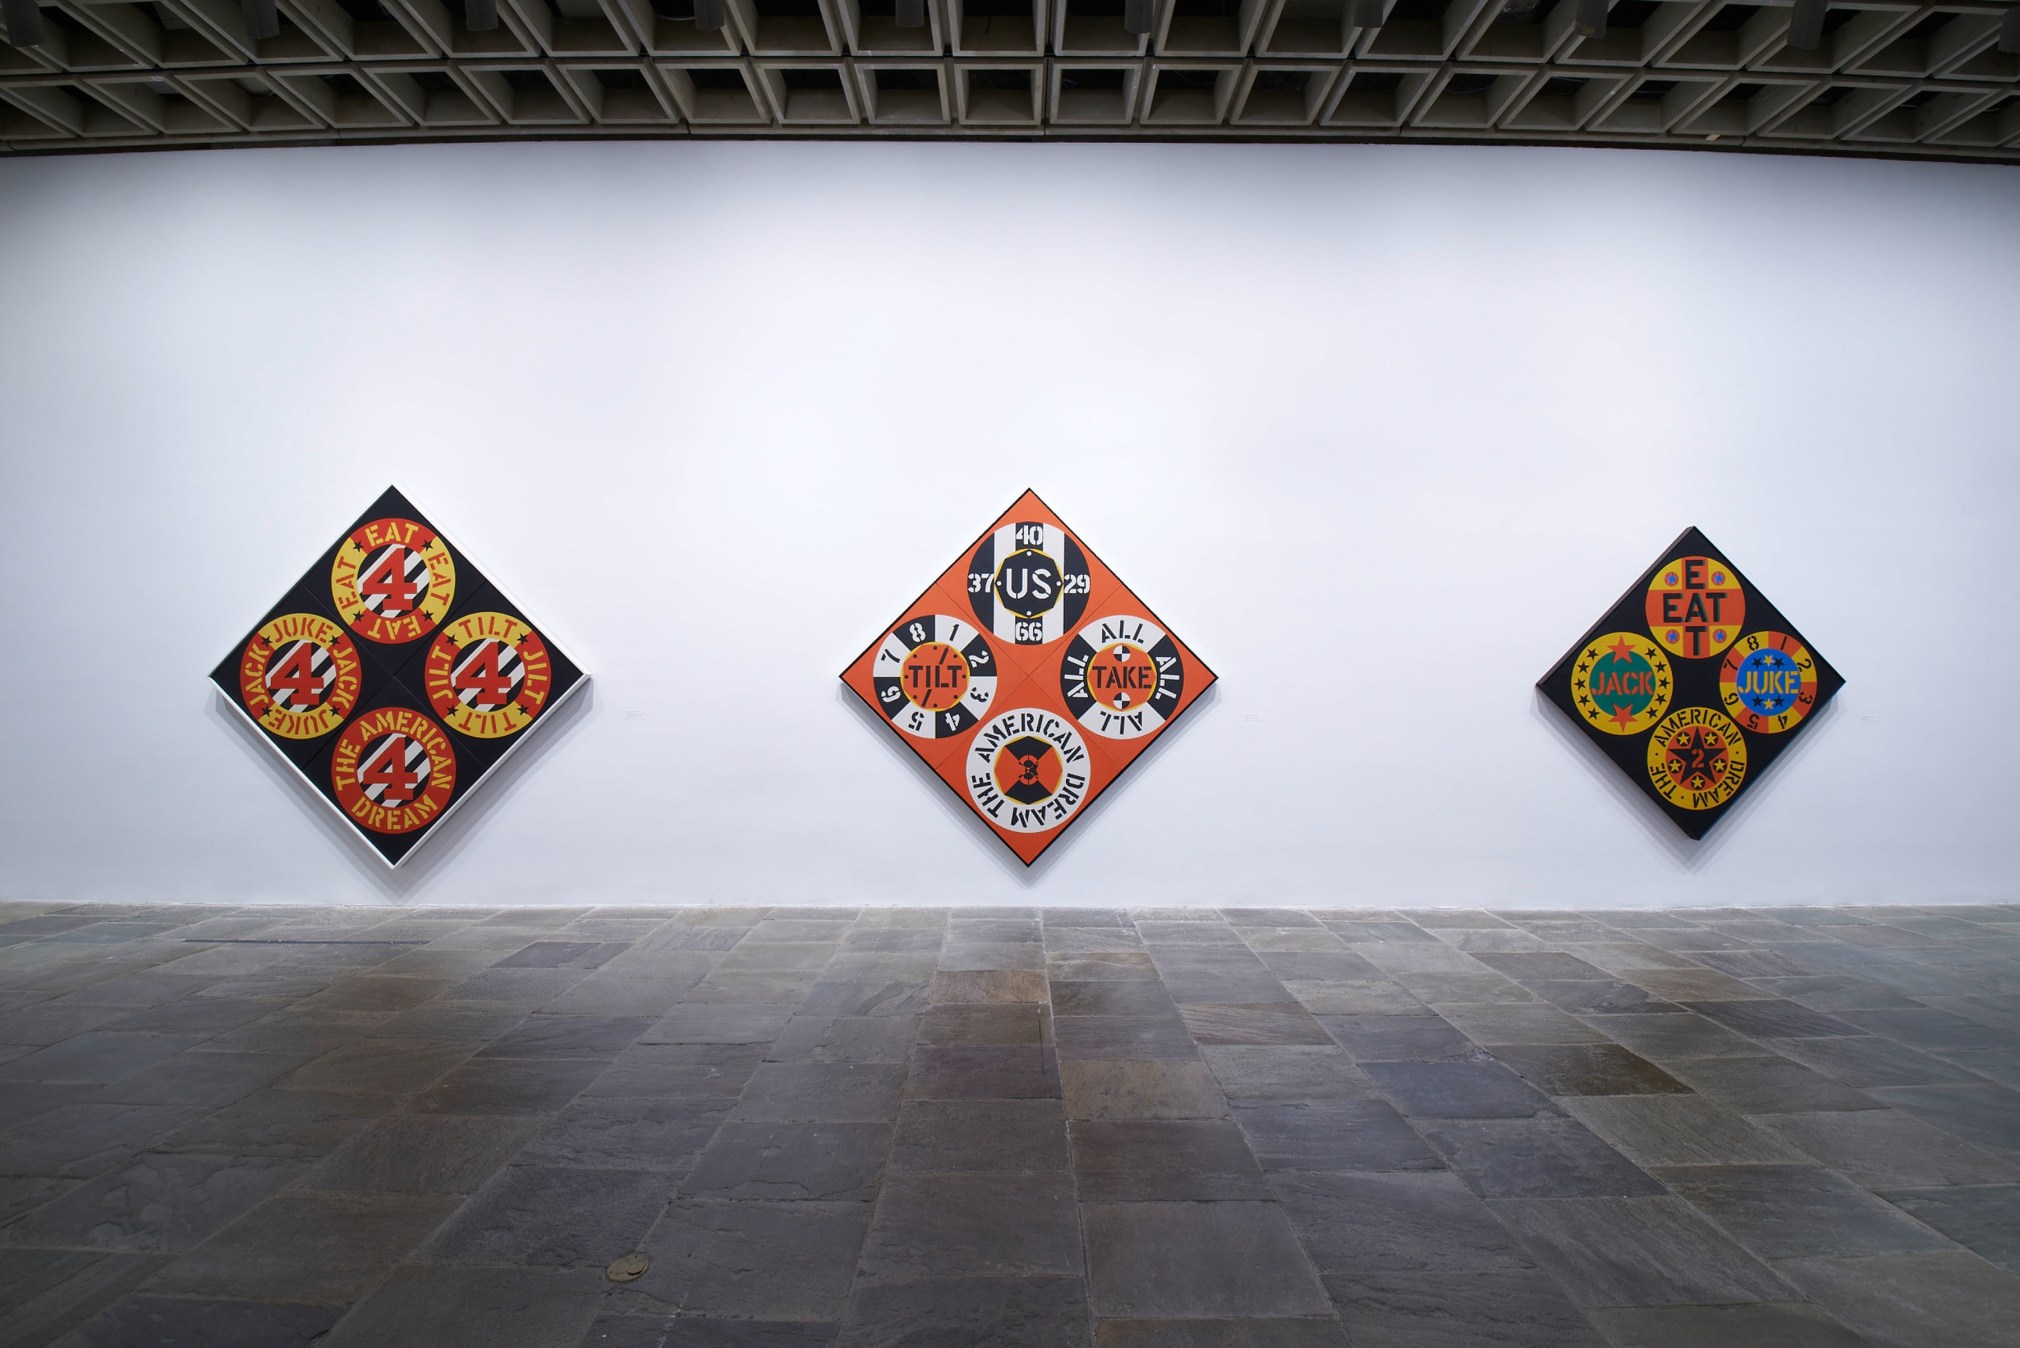 Installation view of Robert Indiana: Beyond LOVE, Whitney Museum of American Art, New York, September 26, 2013&ndash;January 5, 2014. Left to right, The Beware-Danger American Dream #4 (1963), The Red Diamond American Dream #3 (1962), and The Black Diamond American Dream #2 (1962), &nbsp;